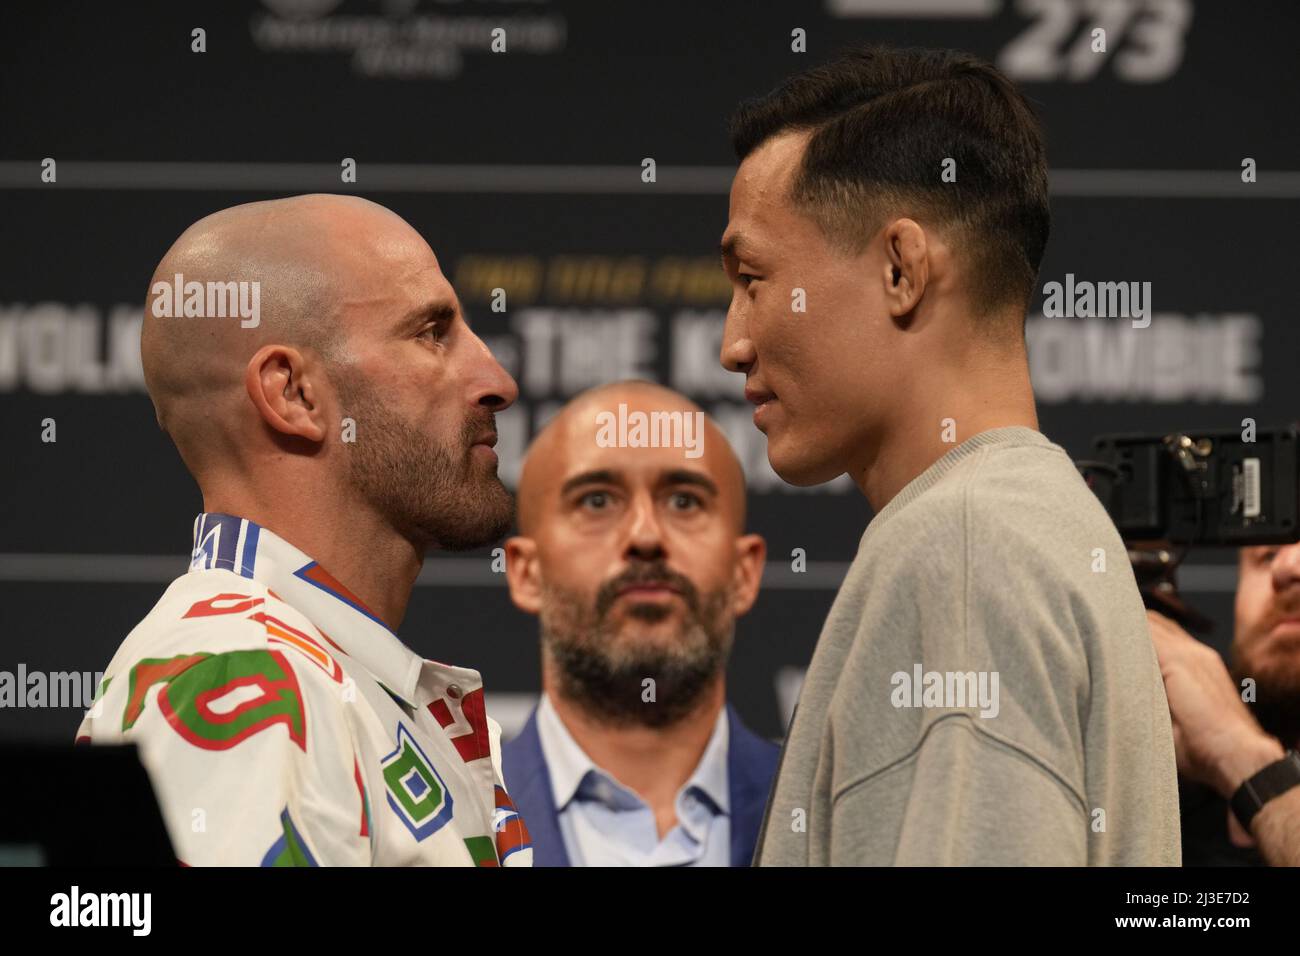 JACKSONVILLE, FL - April 7: Alexander Volkanovski (L) and Korean Zombie (R) face-off the press and the fans for the press conference at Times Union Center for UFC 273 - Volkanovski vs The Korean  - Presser on April 7, 2022 in Jacksonville, Florida, United States. (Photo by Louis Grasse/PxImages) Stock Photo